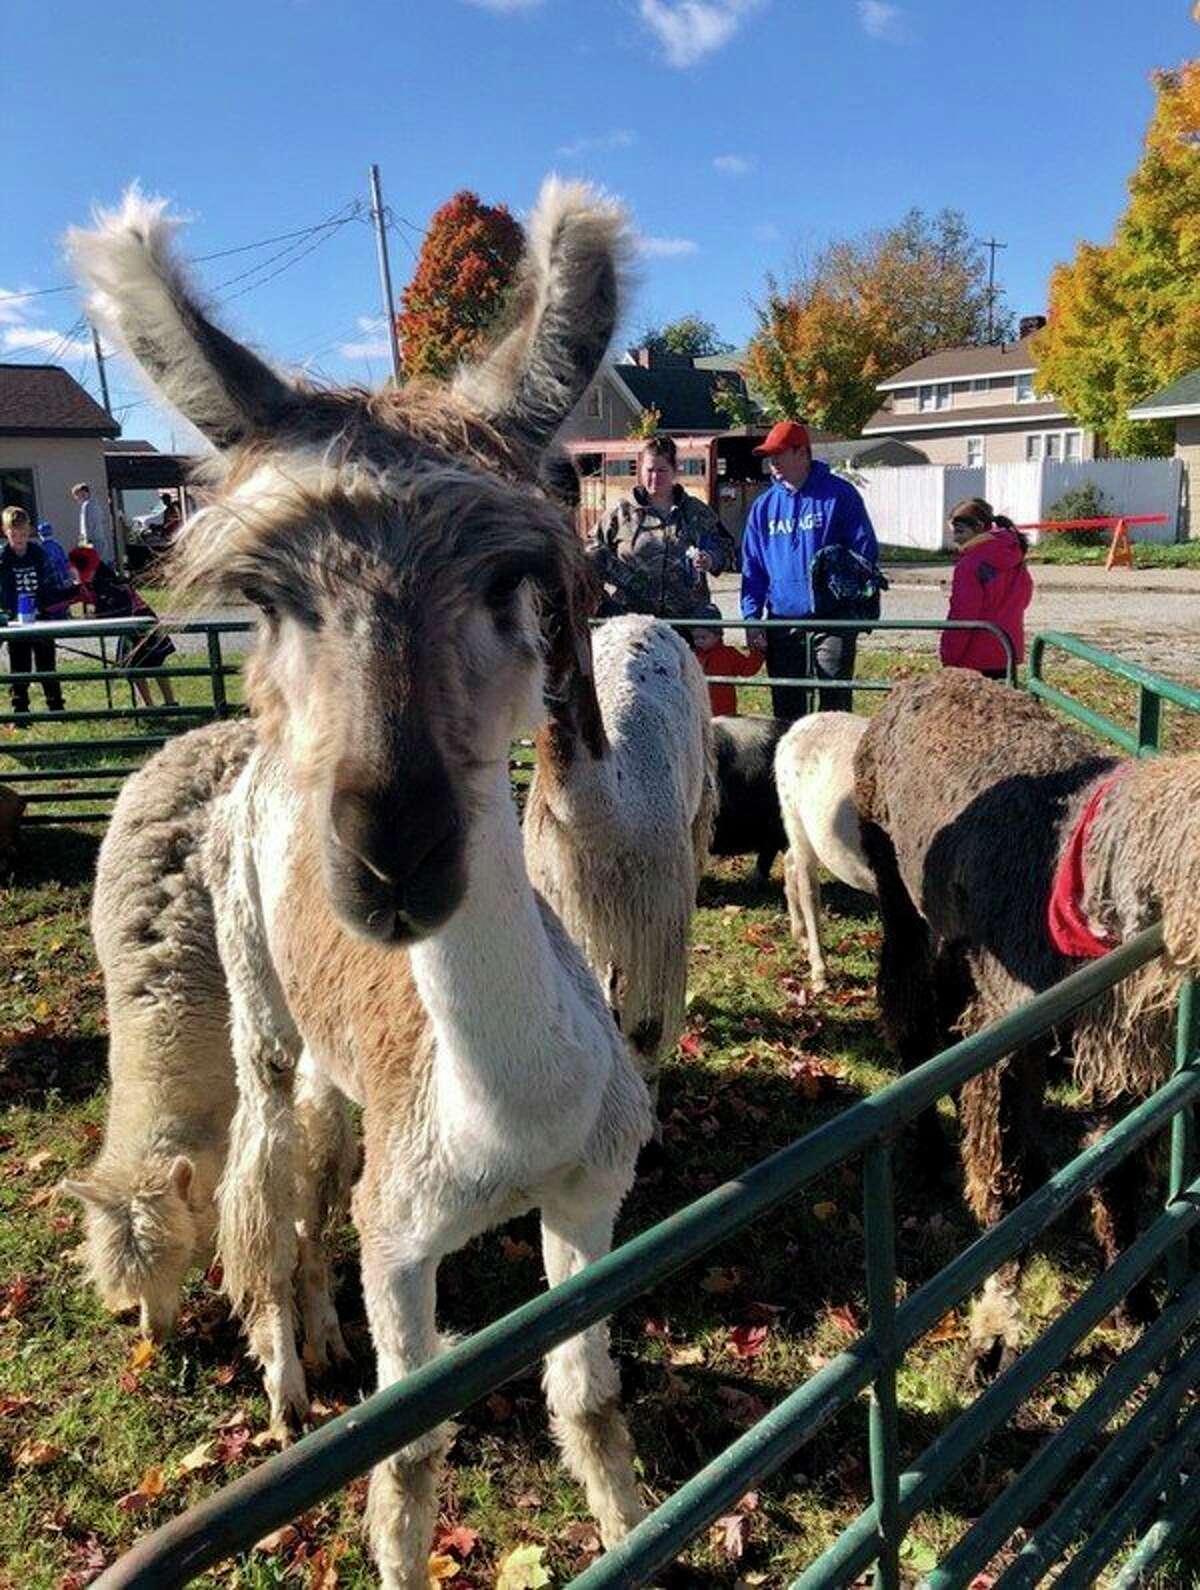 With a variety of animals, the MOSAC Petting Zoo will take place during the Evart Fall Festival. (Courtesy photo)